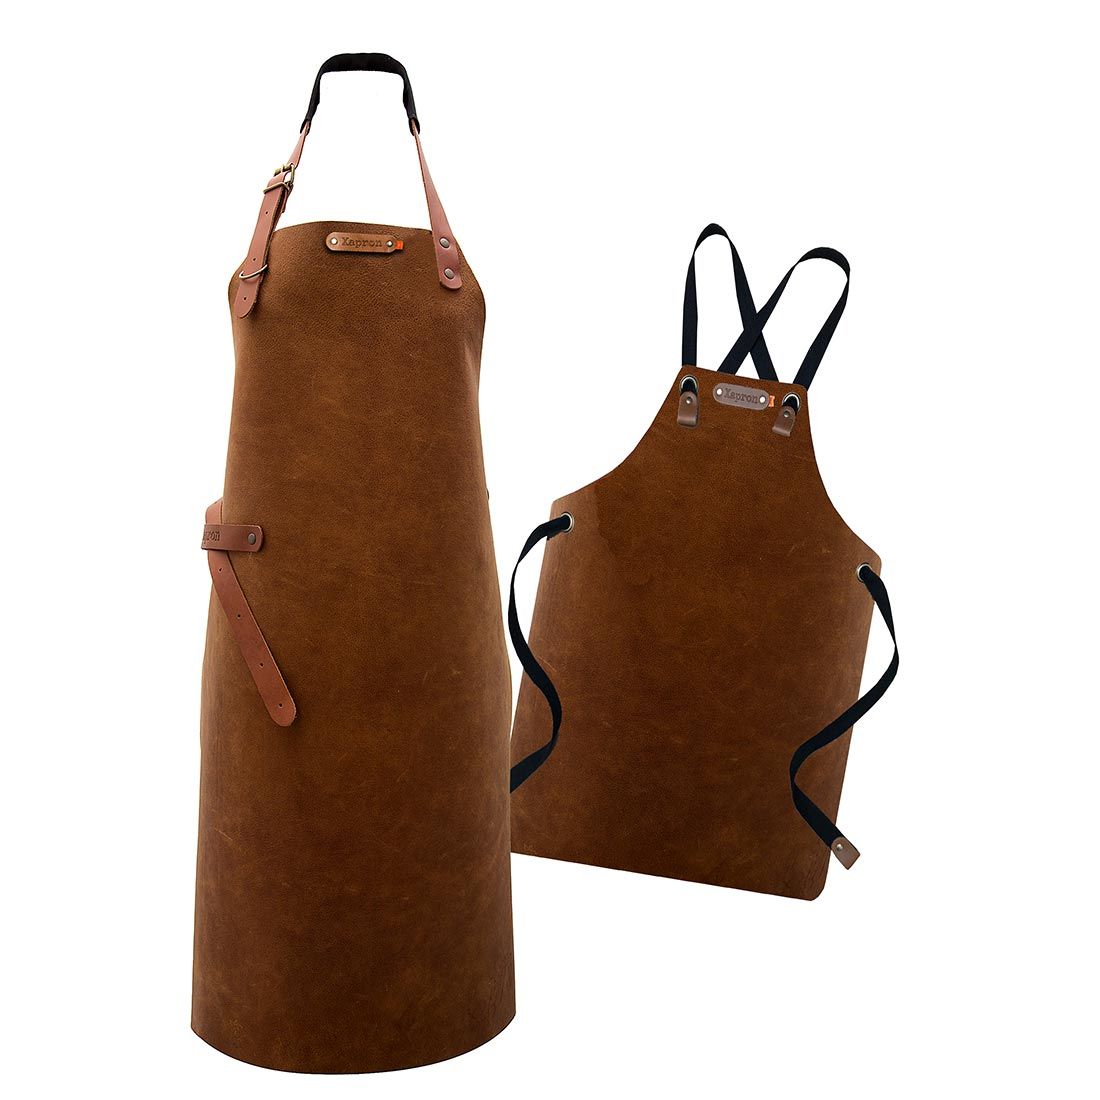 old leather apron  front apron made of leather  occupational safety  work apron